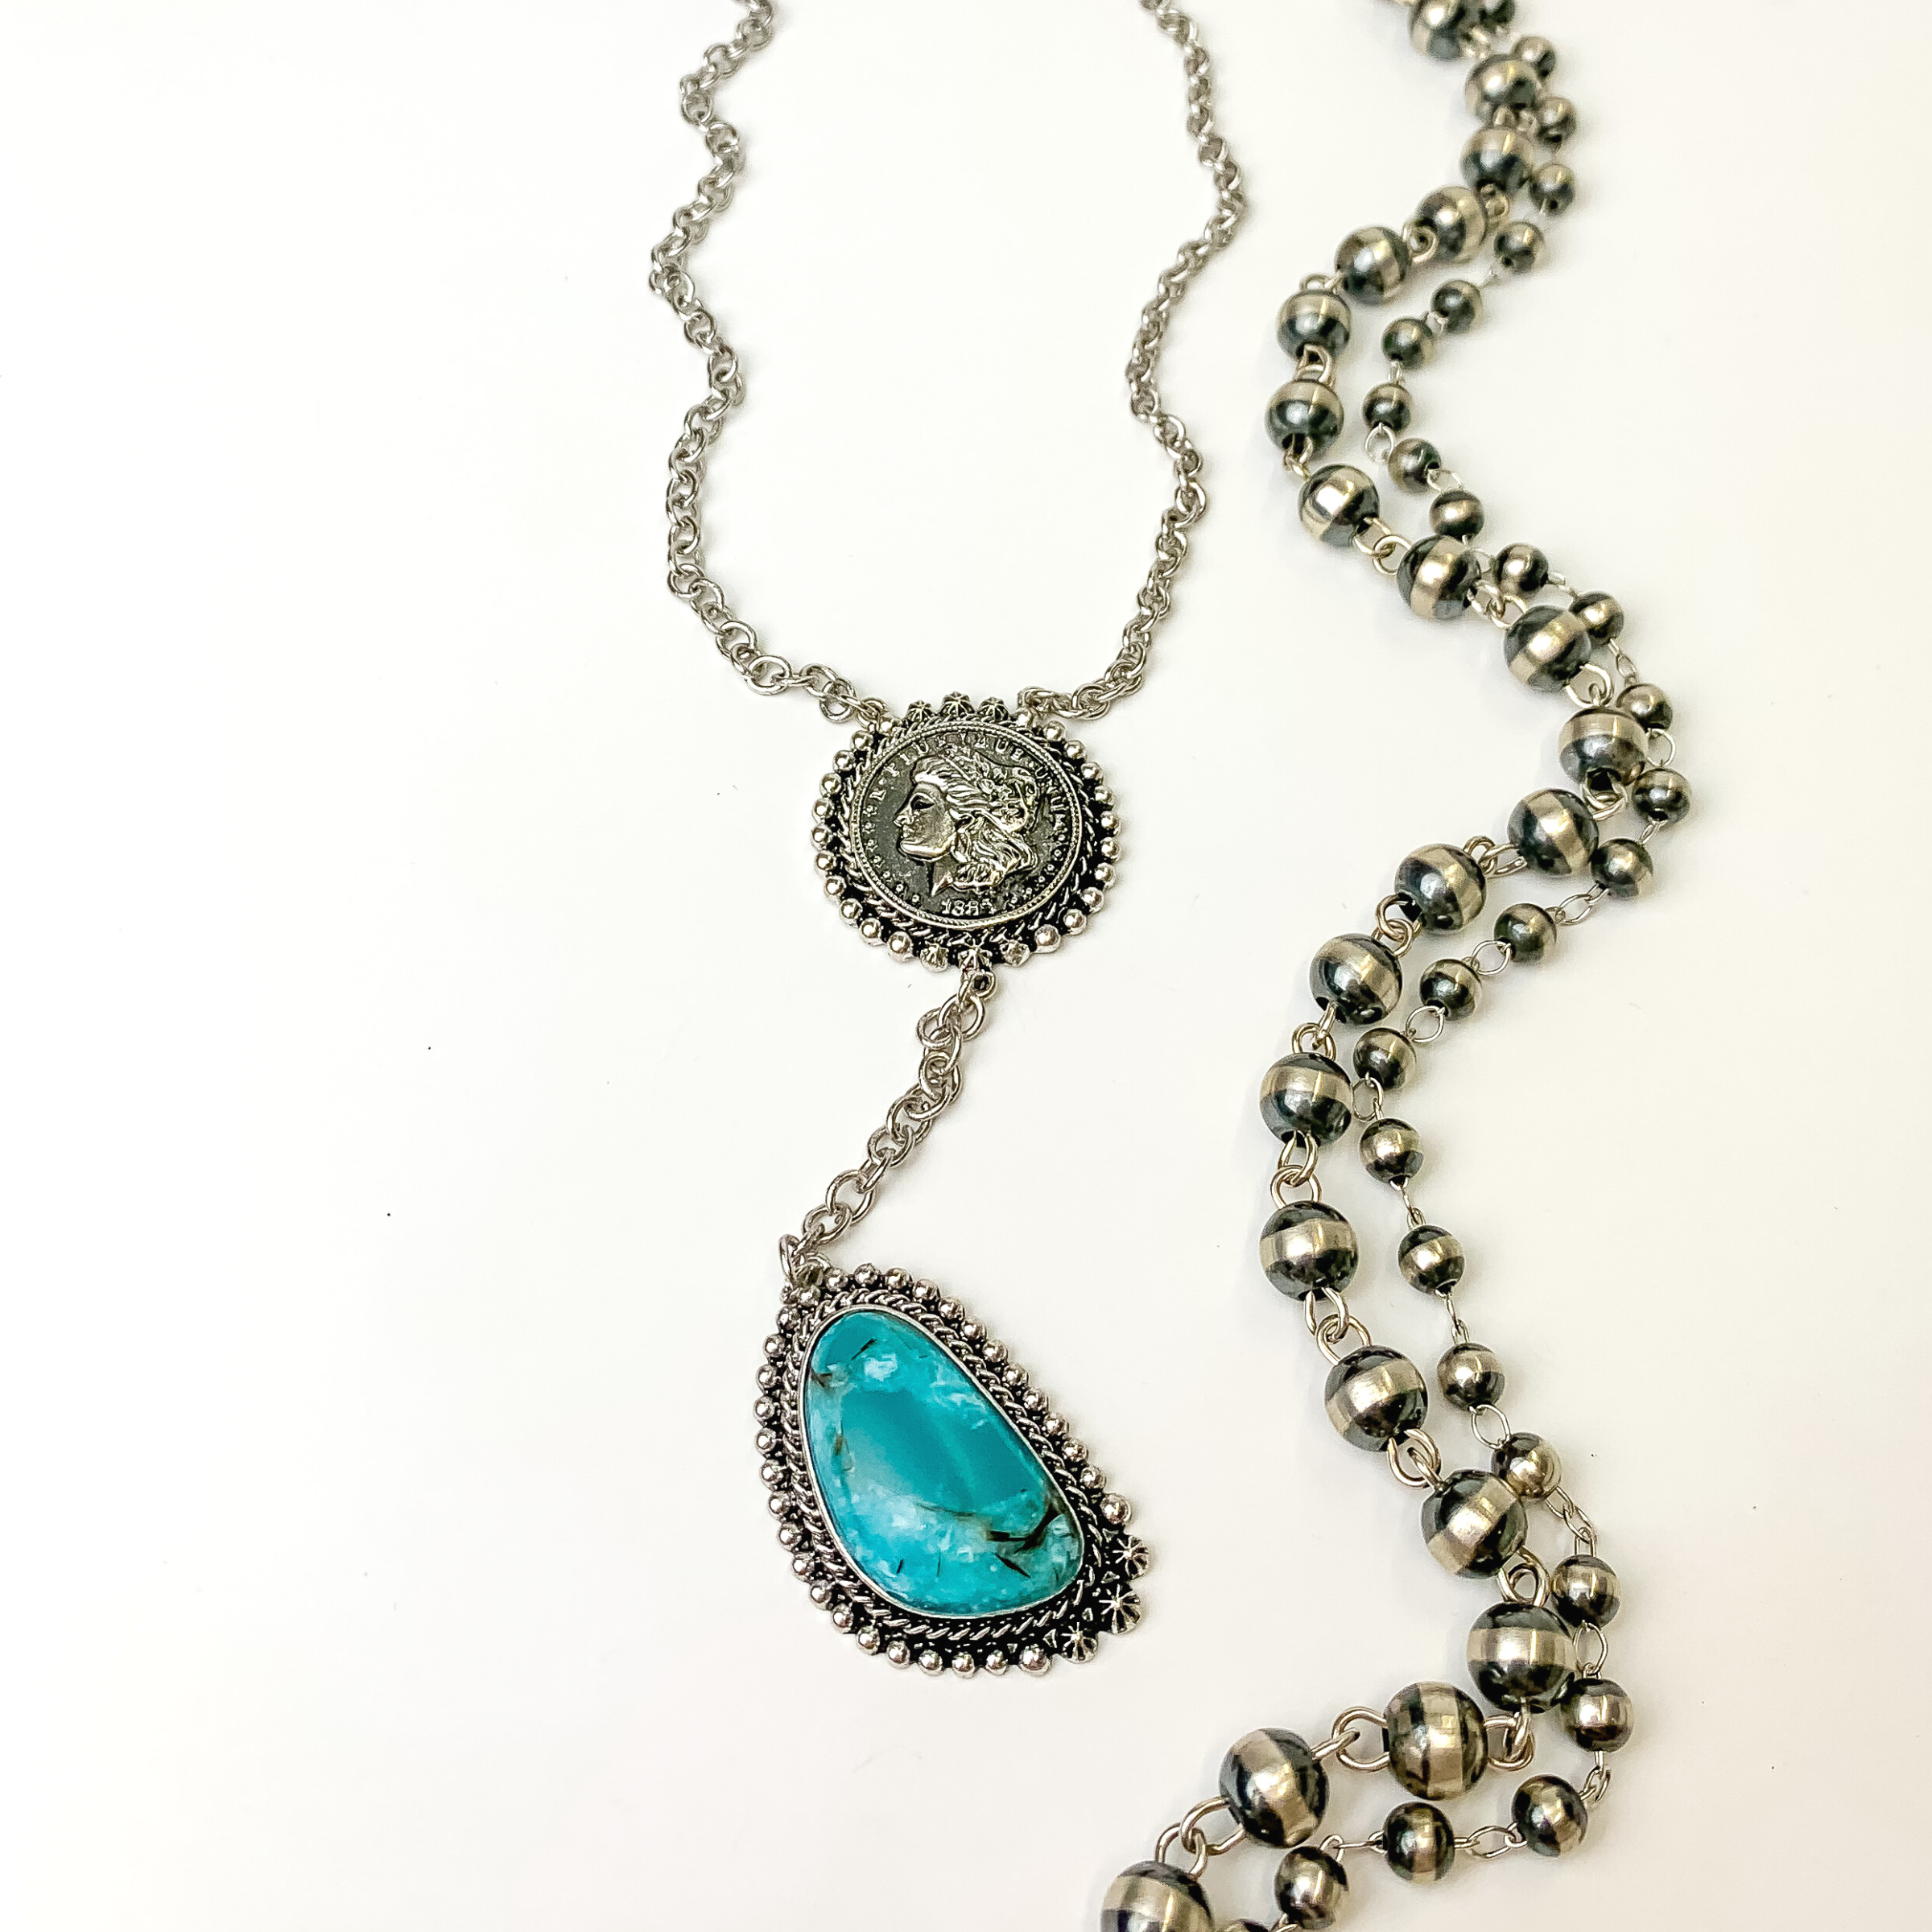 Silver chain, lariat necklace with a silver coin pendant and turquoise stone drop. This necklace is pictured on a white background with silver beads on the right side. 